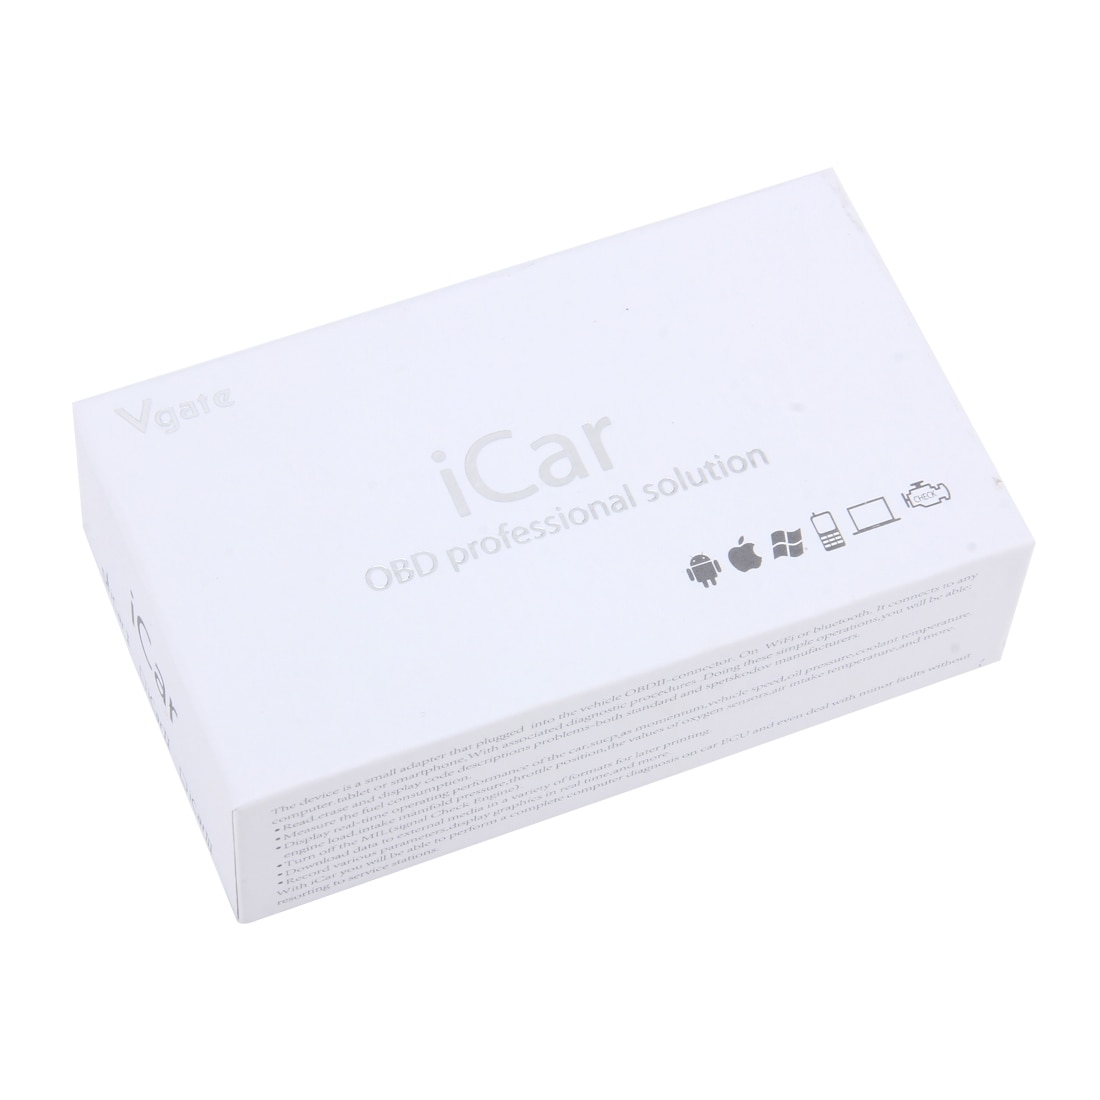 Vgate iCar Pro OBDII Wi-fi Android